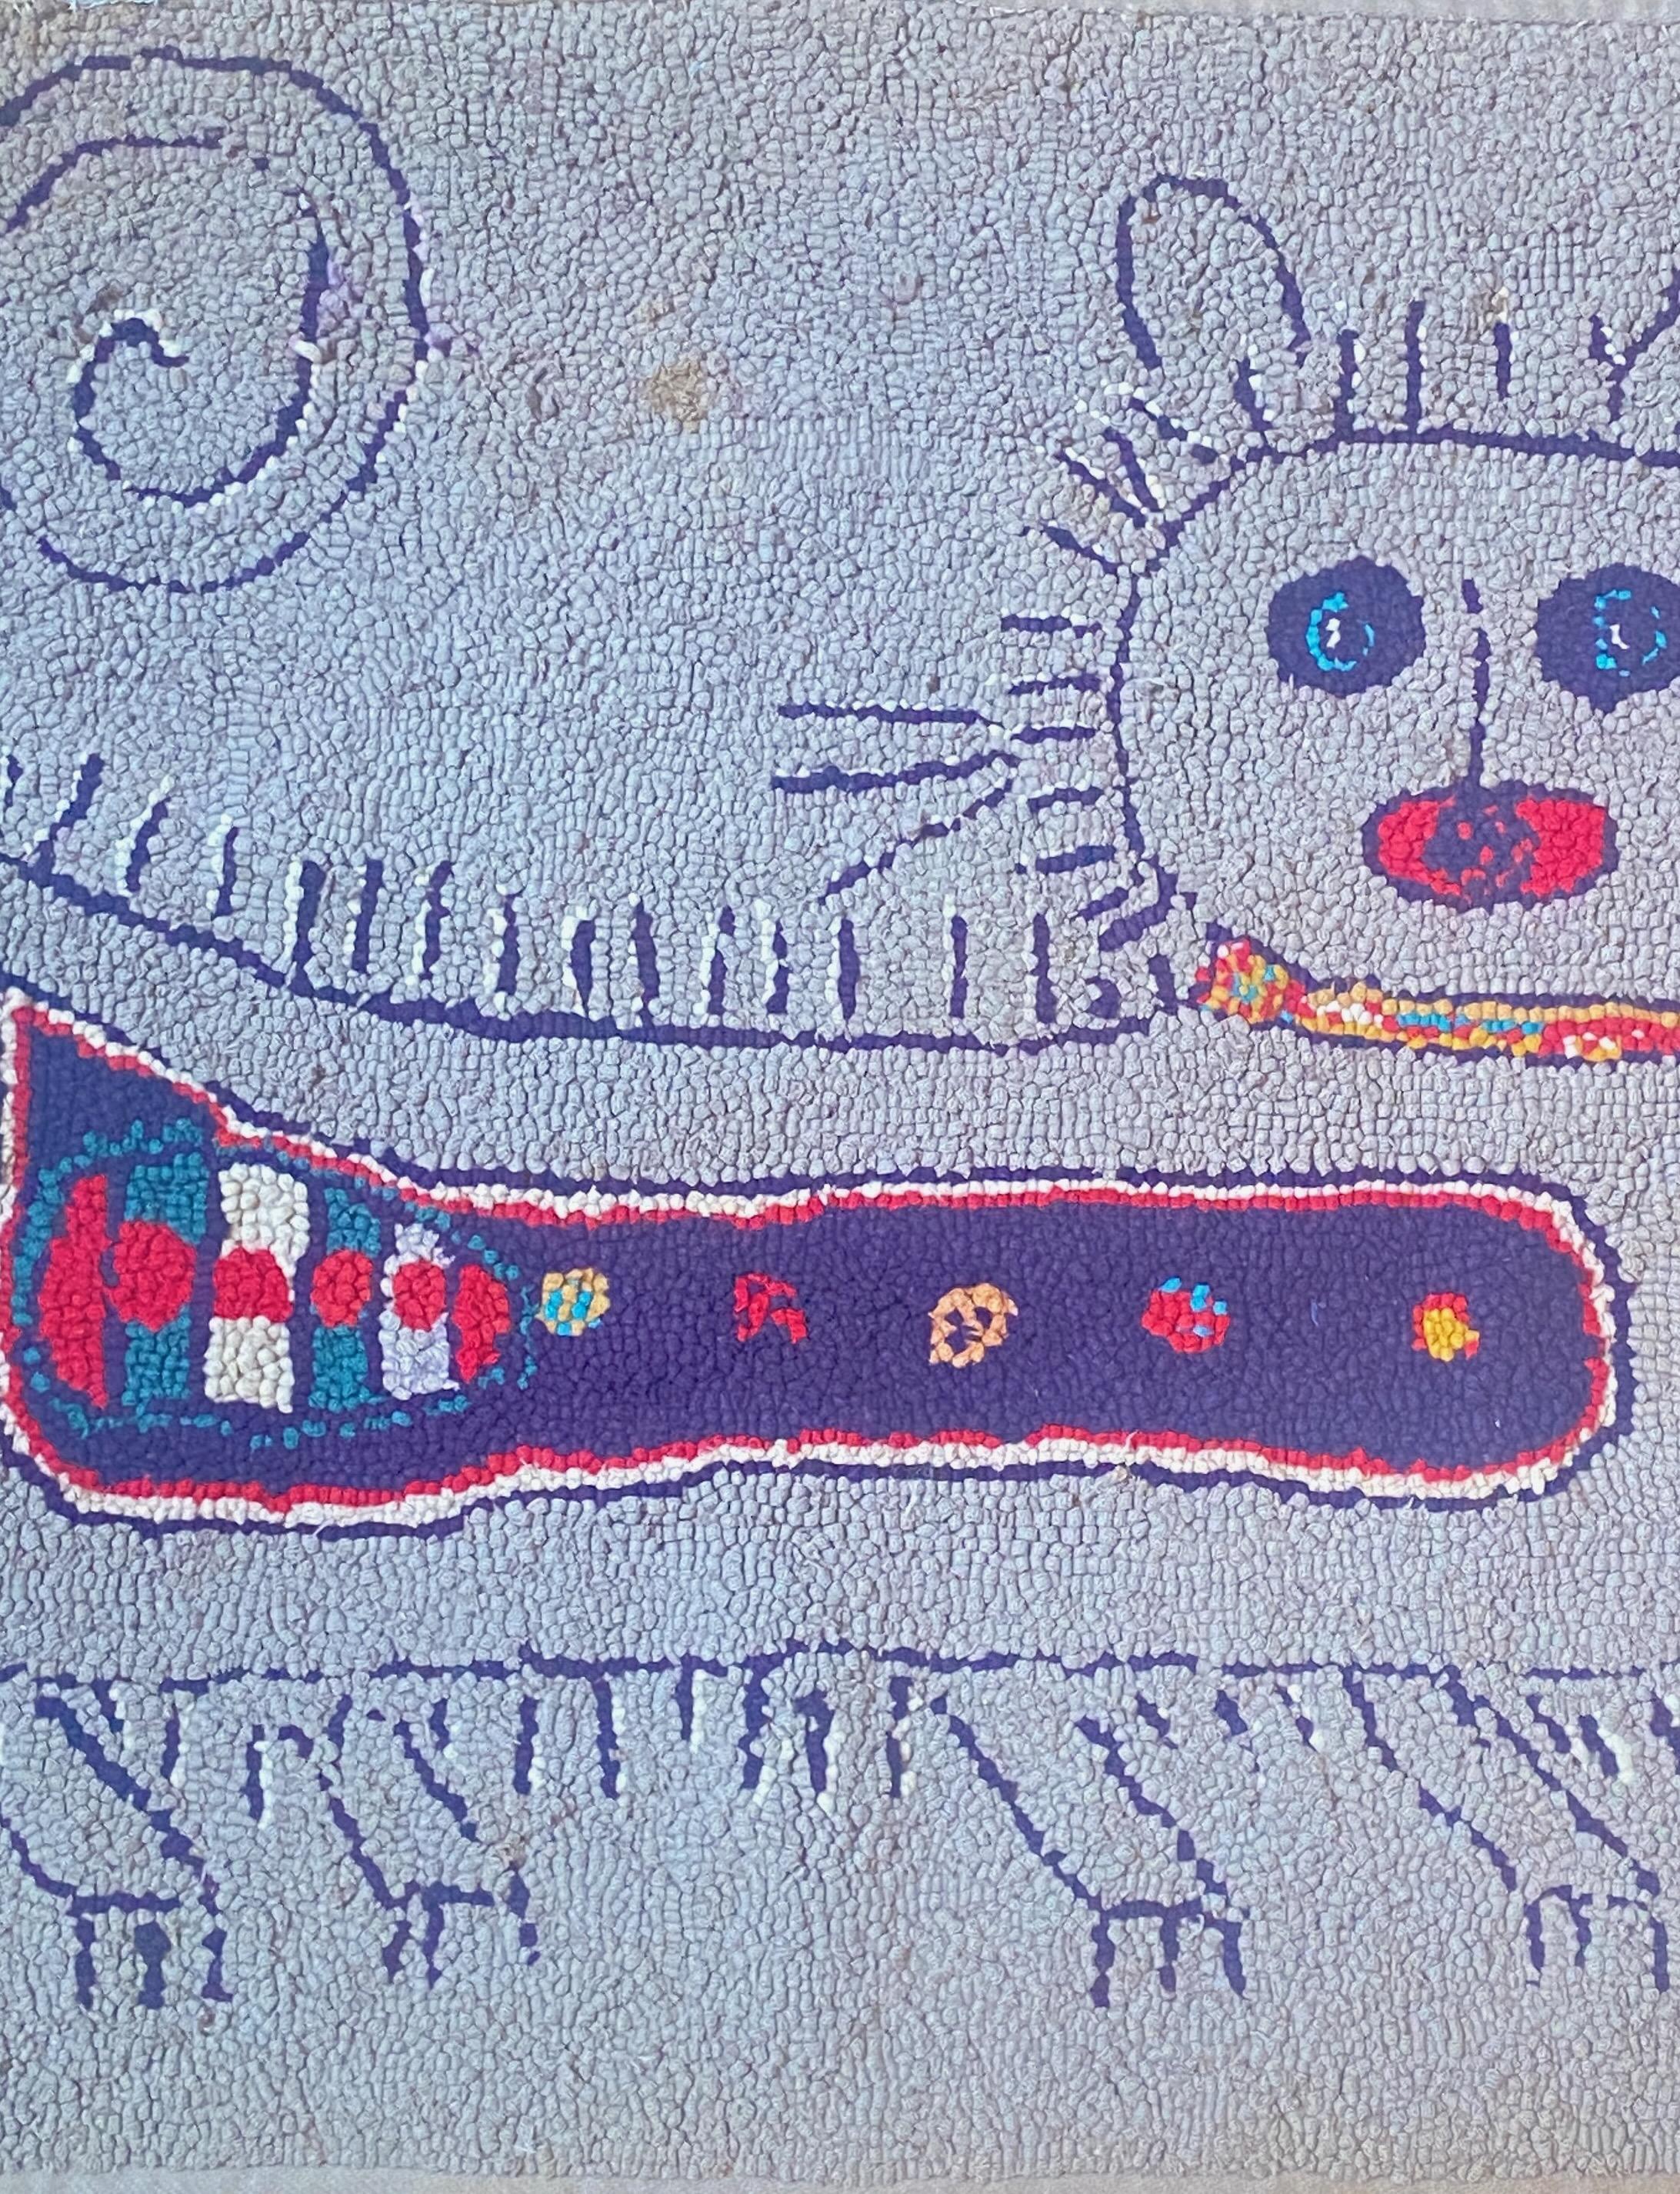 Hand-Crafted Modernist Mid Century American Folk Art Hooked Rug of a Cat dated 1963 For Sale